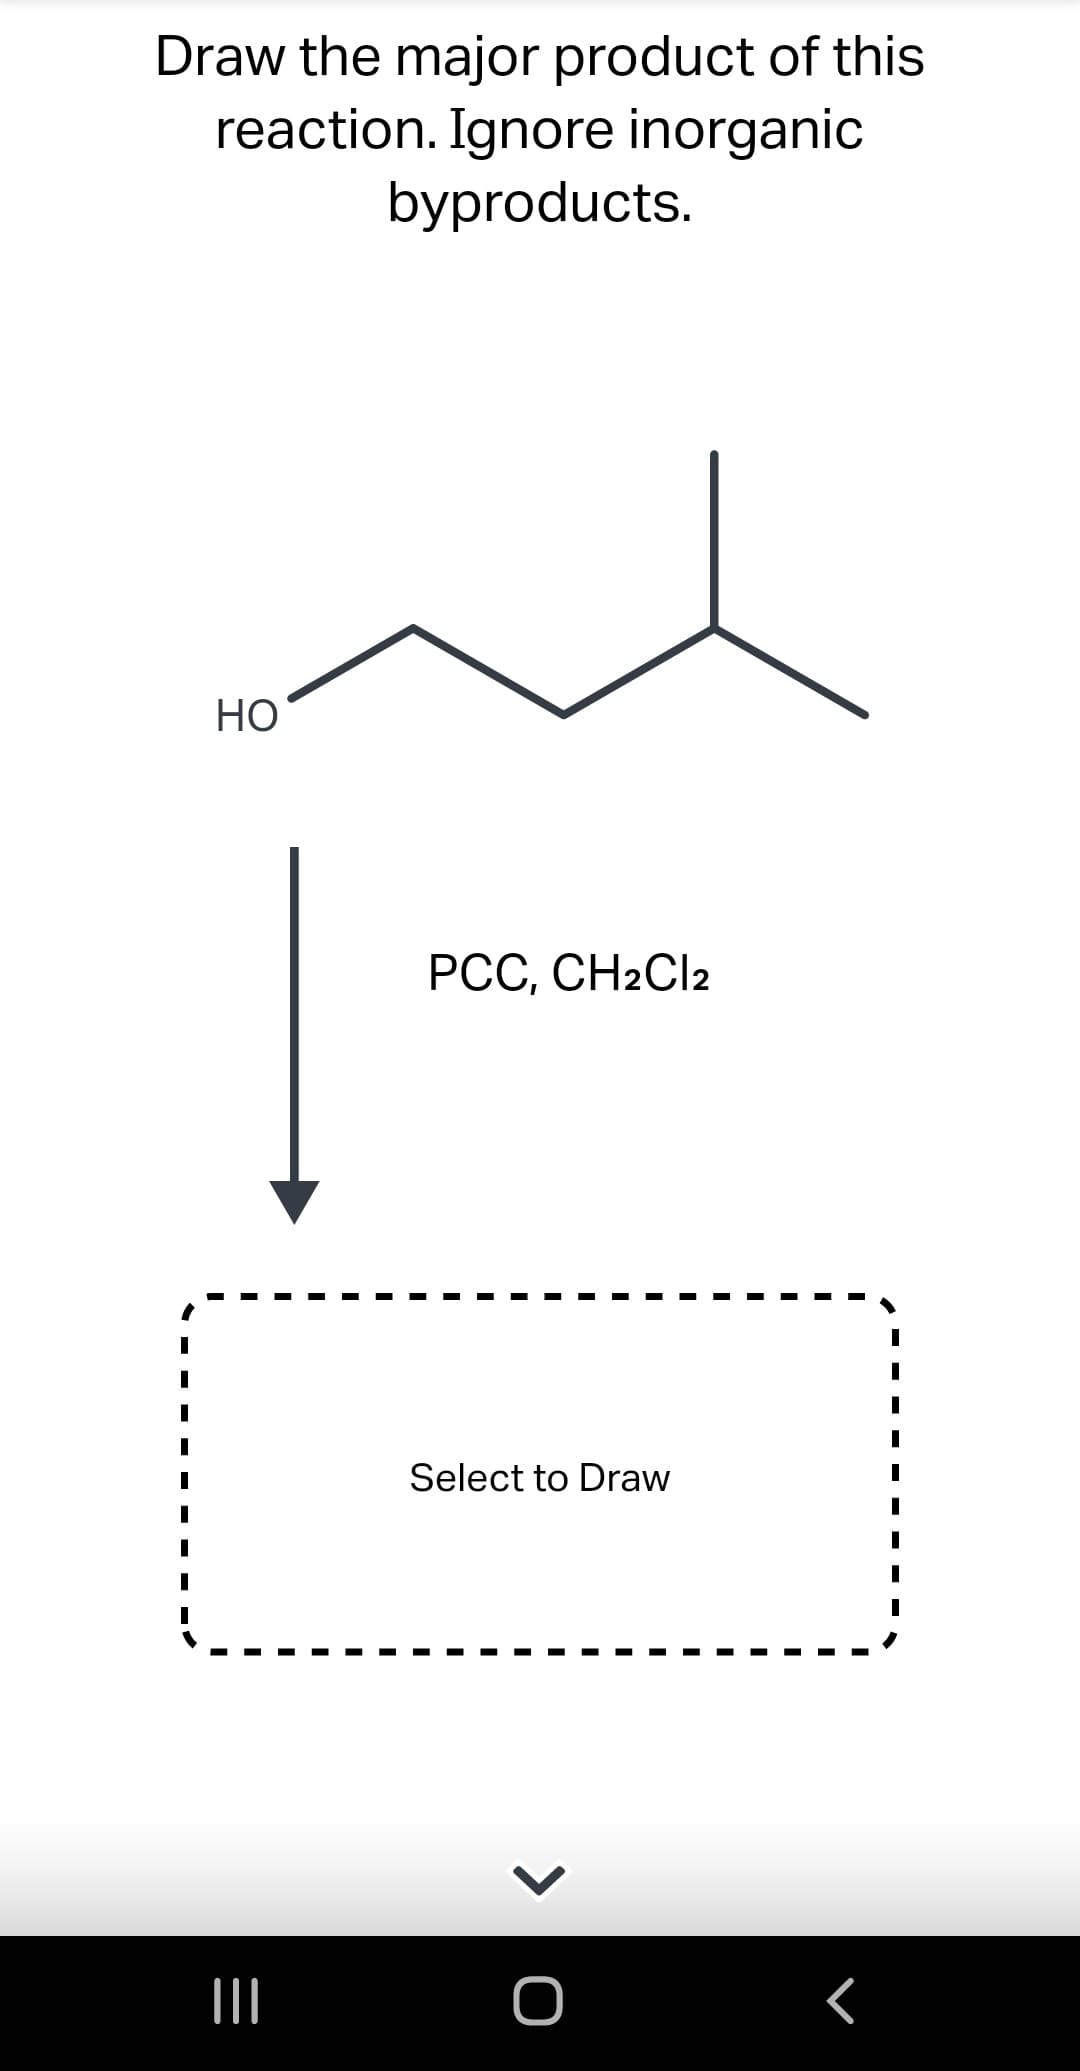 Draw the major product of this
reaction. Ignore inorganic
byproducts.
HO
|||
PCC, CH2Cl2
Select to Draw
> O
r